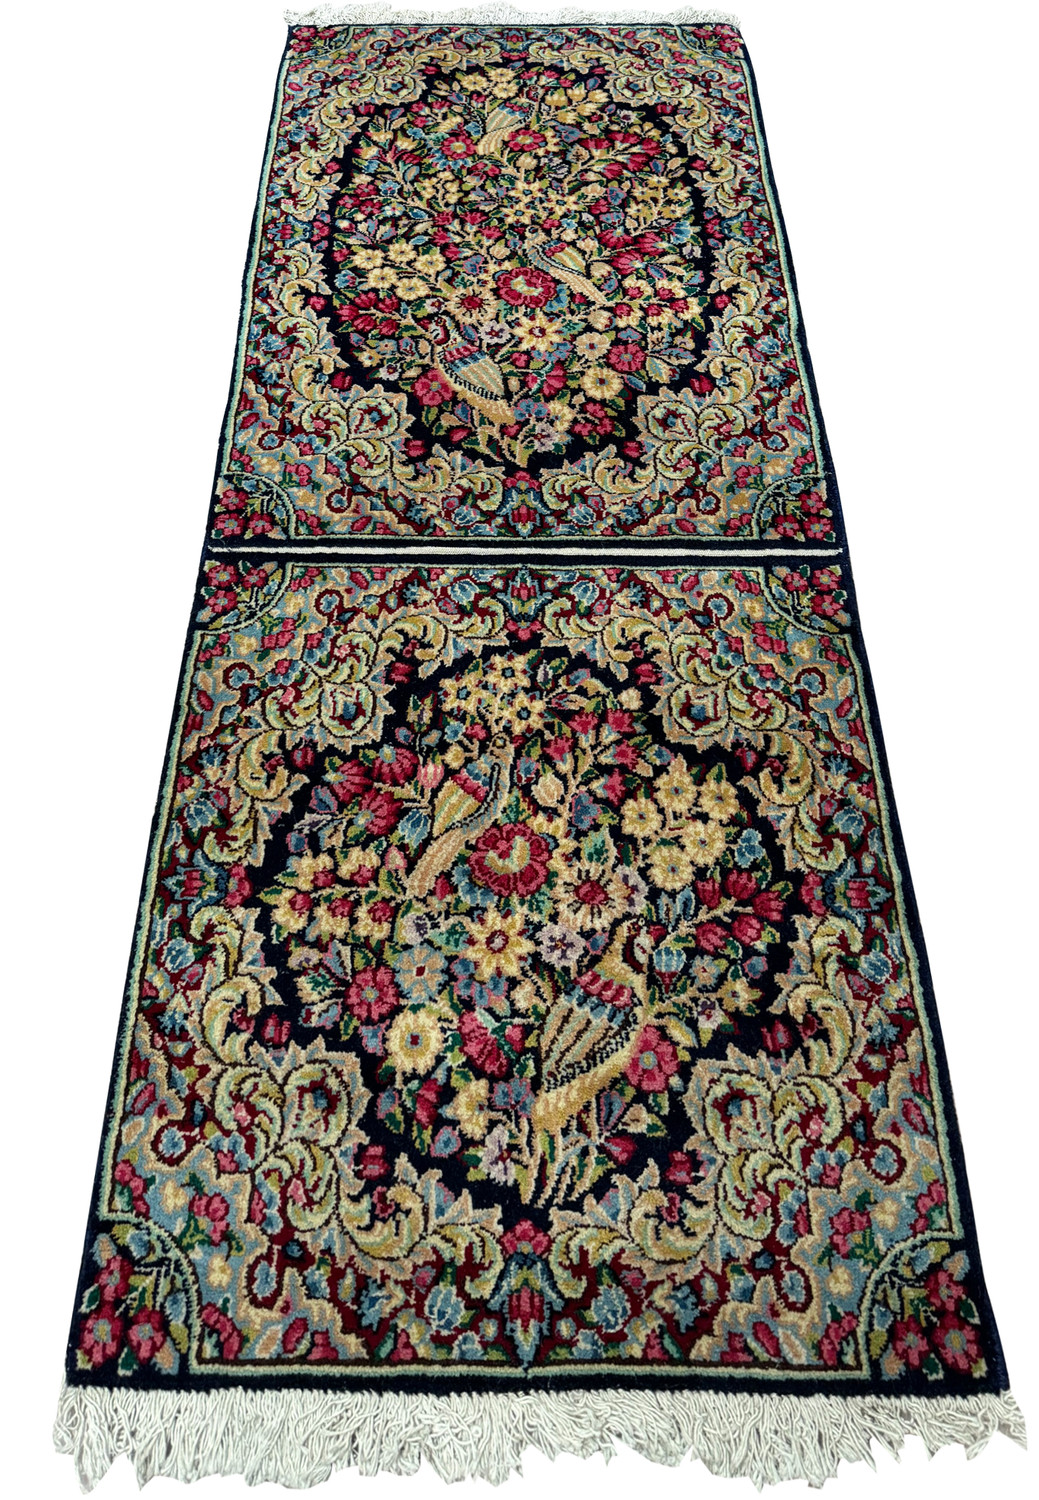 Top view of the Persian Kerman rug's elaborate floral design and dual-rug weaving technique."